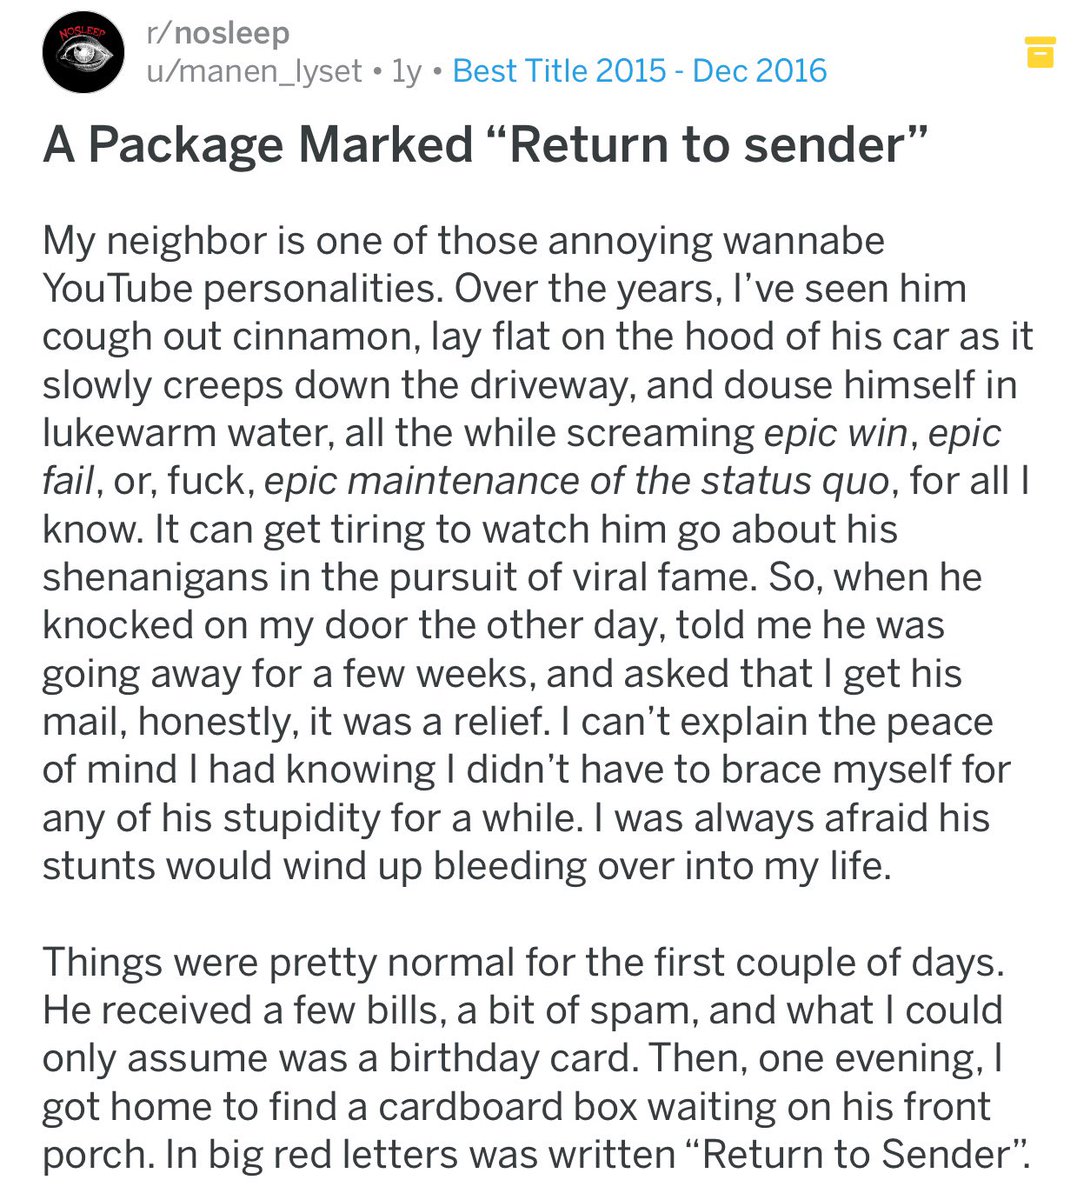 ↳ A package marked “Return to sender”{ https://www.reddit.com/r/nosleep/comments/5j6p8x/a_package_marked_return_to_sender/}